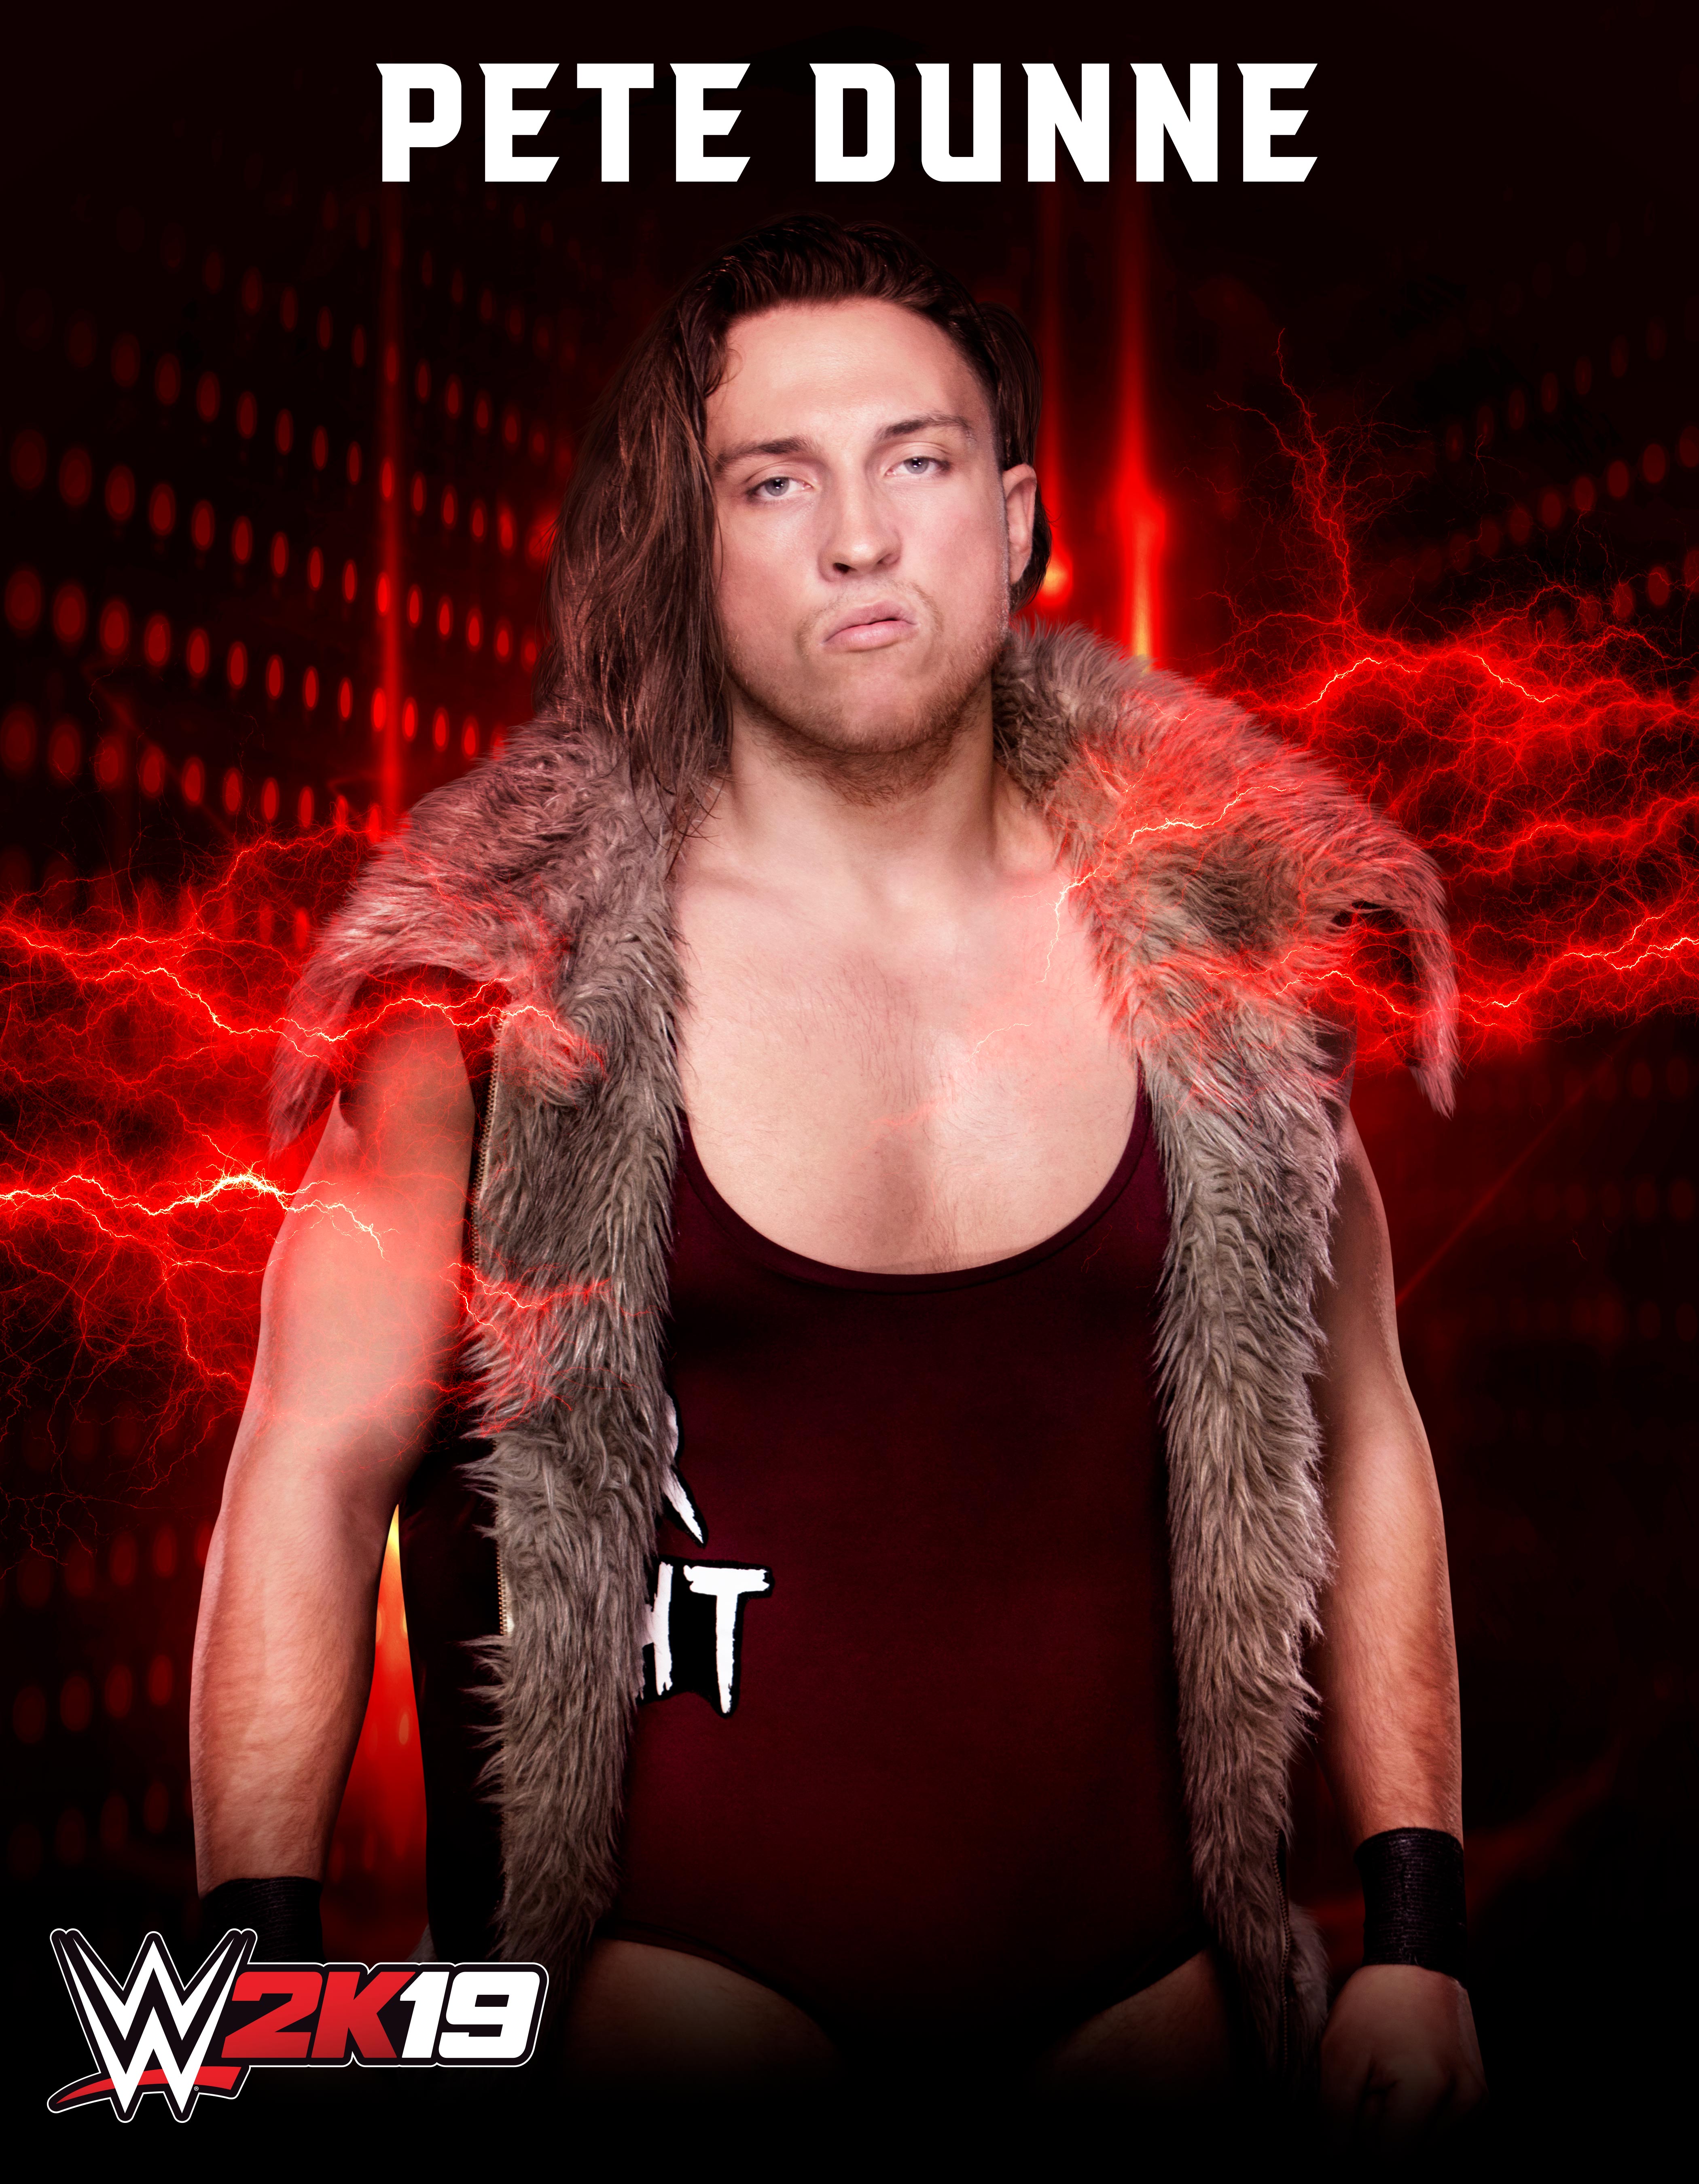 Wwe2k19 Roster Pete Dunne